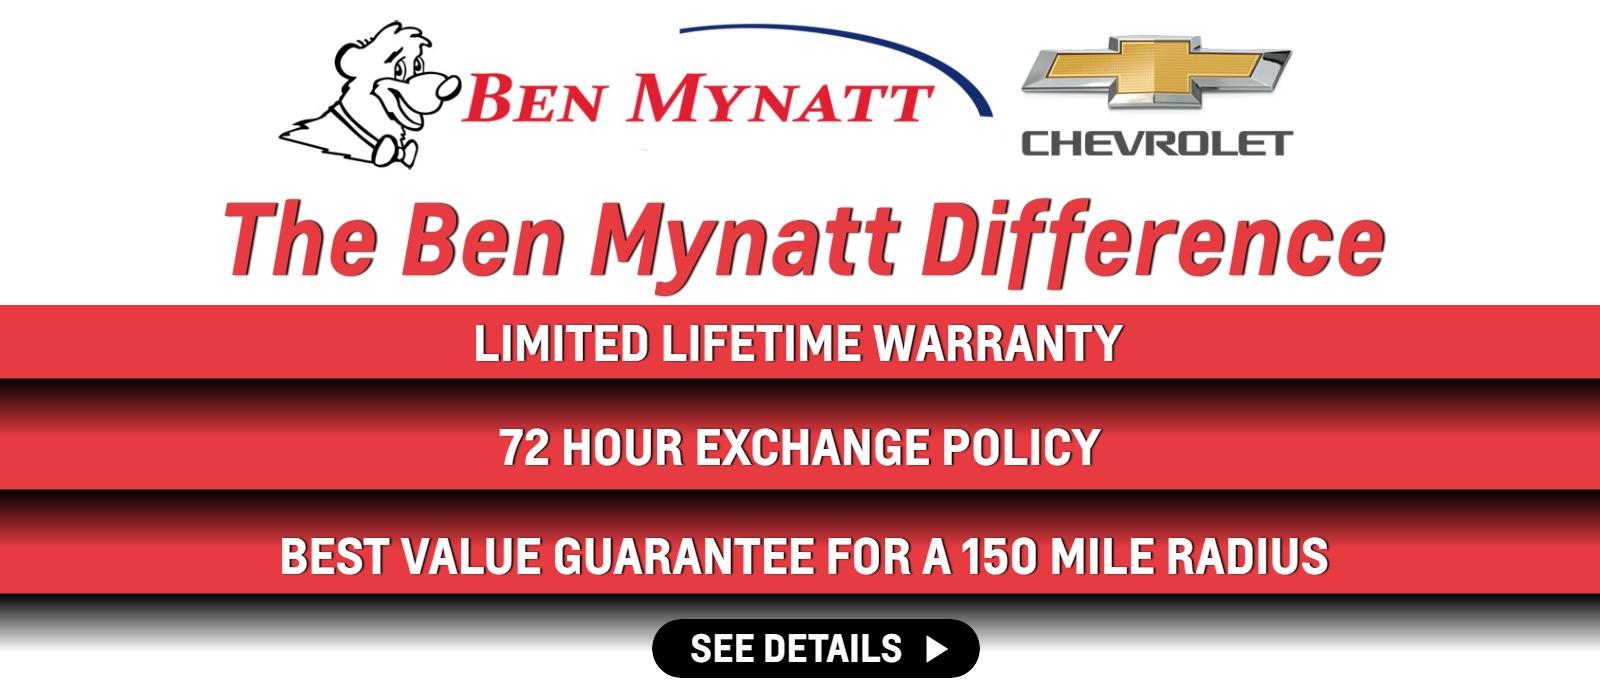 The Ben Mynatt Difference 
Limited Lifetime Warranty
72 Hour Exchange Policy
Best Value Guarantee for a 150 Mile Radius